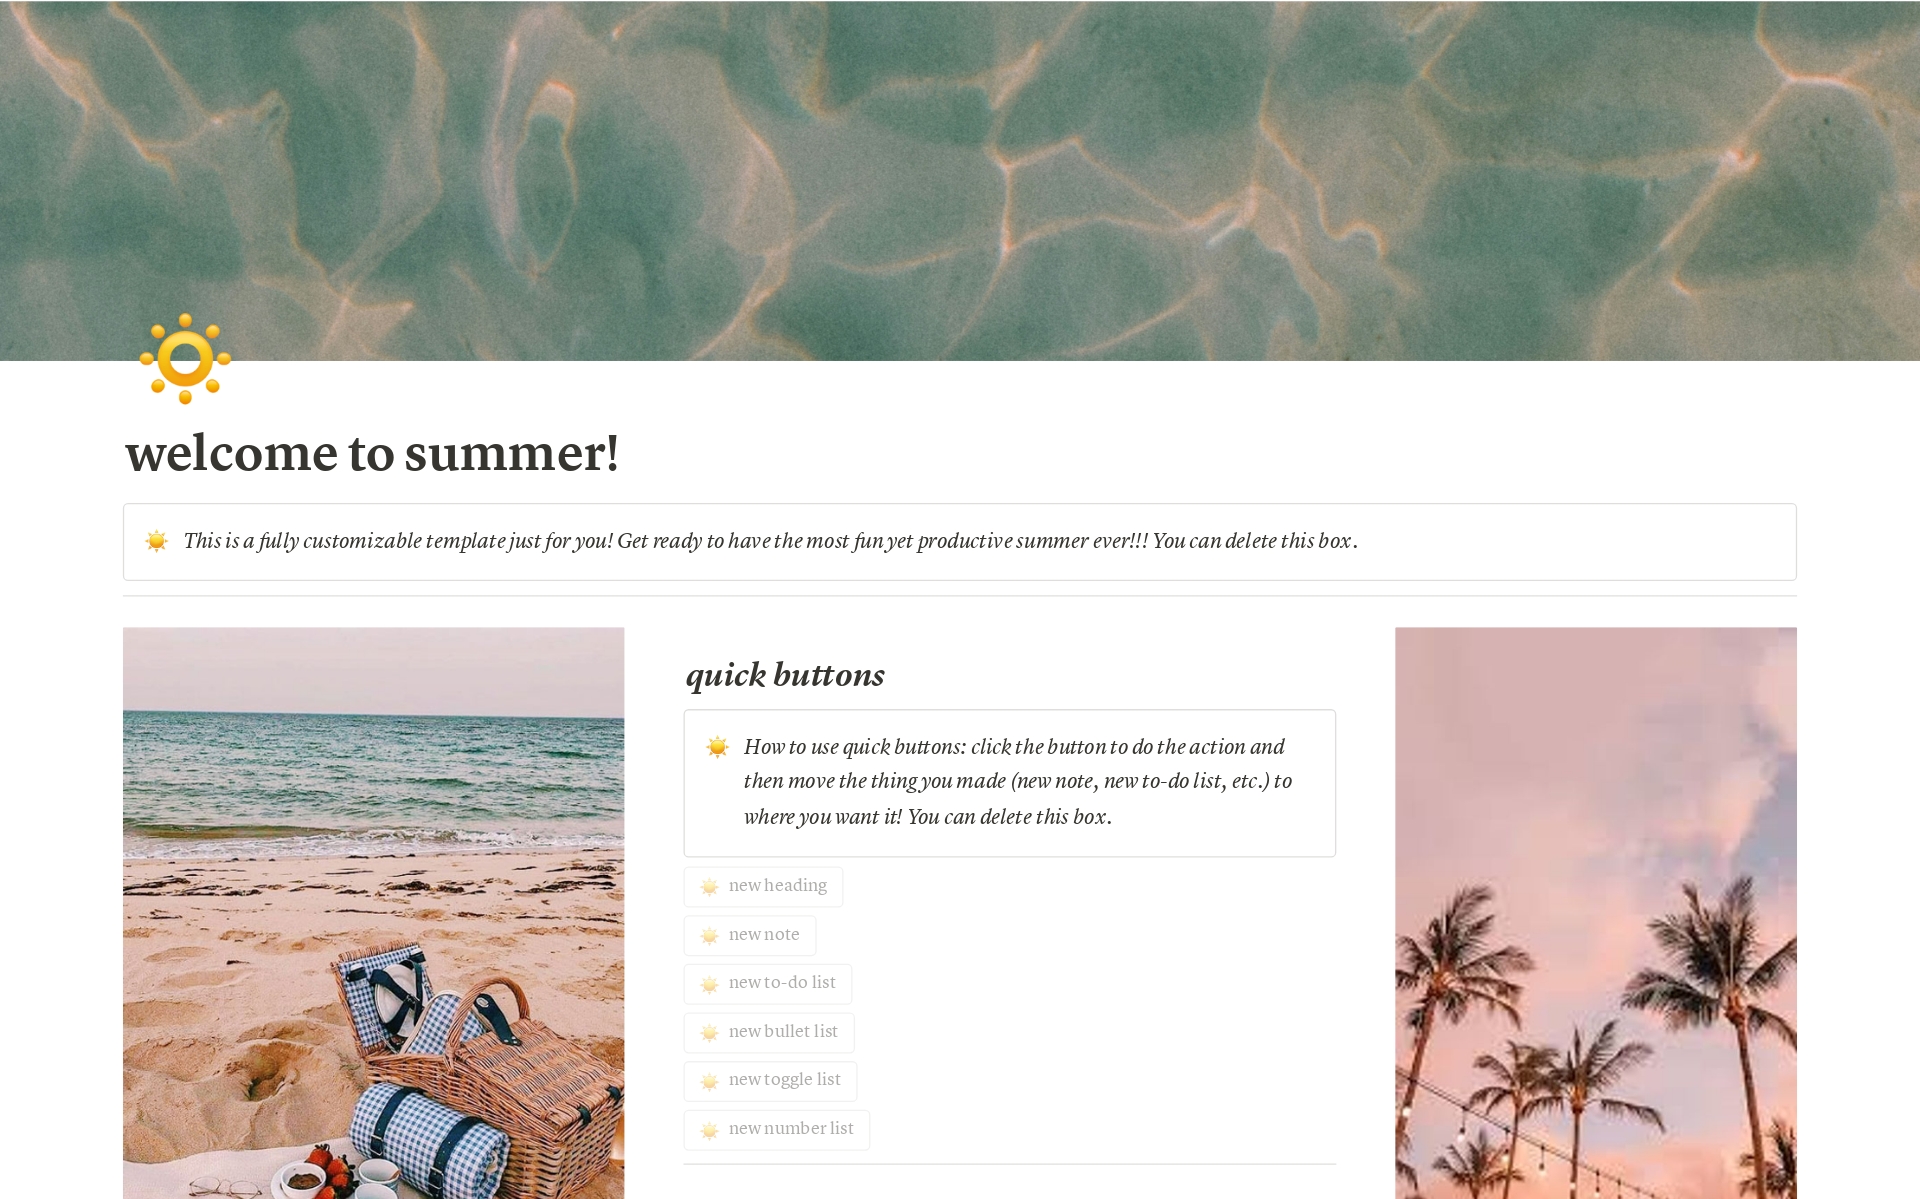 This is a dashboard template for all your summer needs! It is fully customizable, like all of my templates, and has 5+ original subpages!